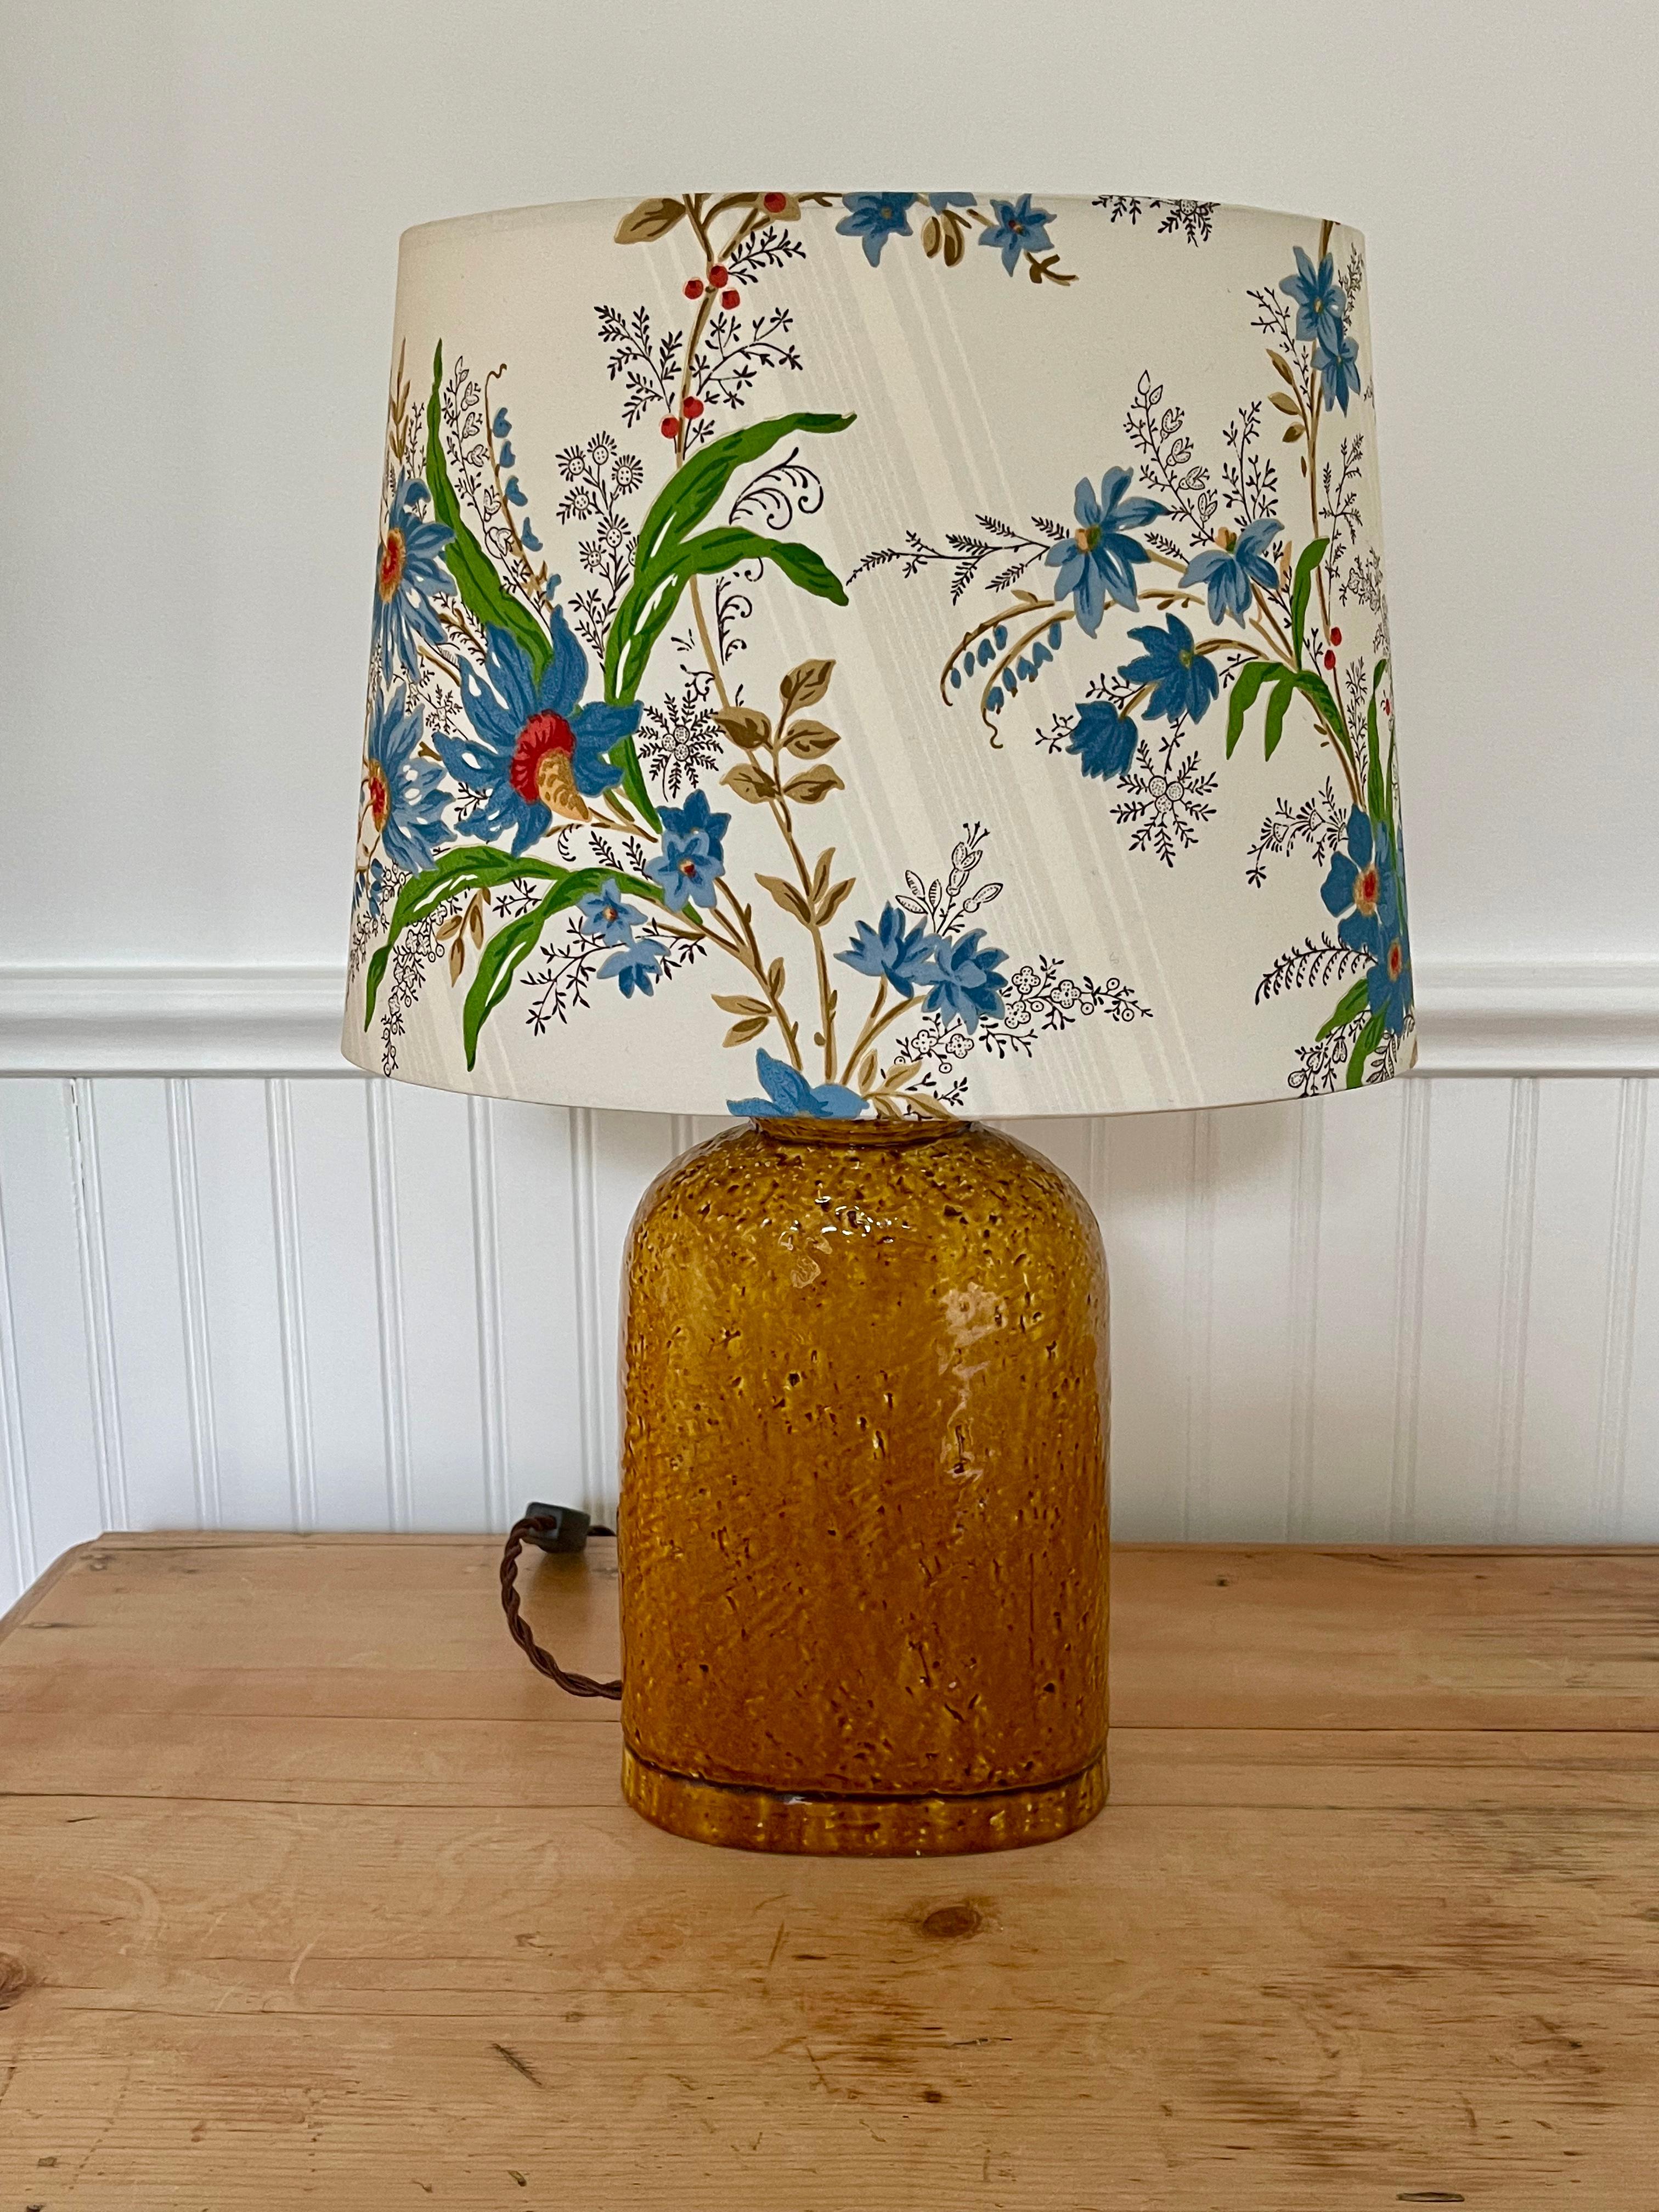 Rare table lamp by Gunnar Nylund (1904-1997) for Rörstrand Fabriks
An ovular shape crafted in chamotte with a rich ochre glaze
Custom Décors Barbares lampshade 
12.5